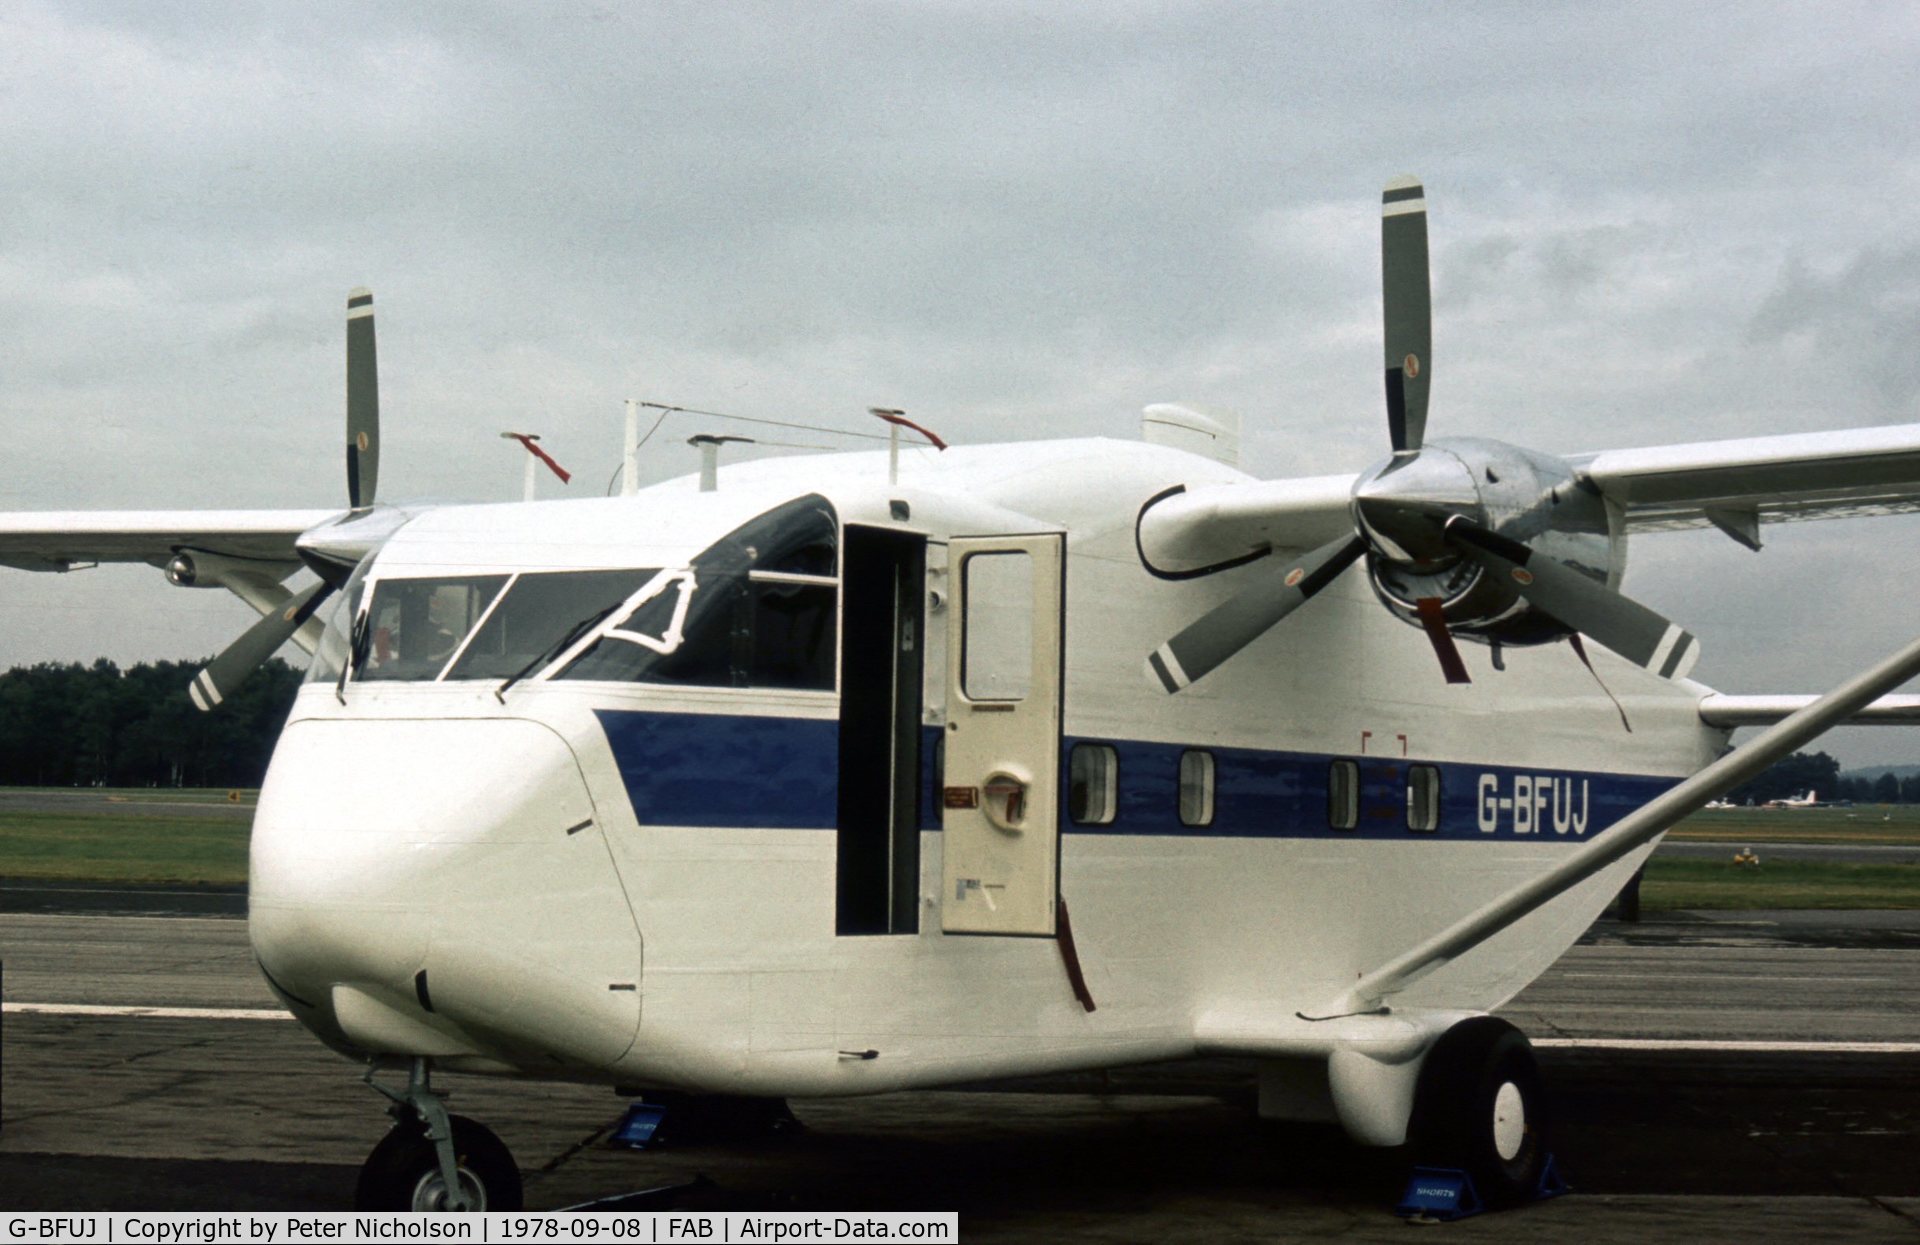 G-BFUJ, 1978 Short SC-7 Skyvan 3-100 C/N SH.1960, Another view of the Shorts Skyvan at the 1978 Farnborough Airshow.